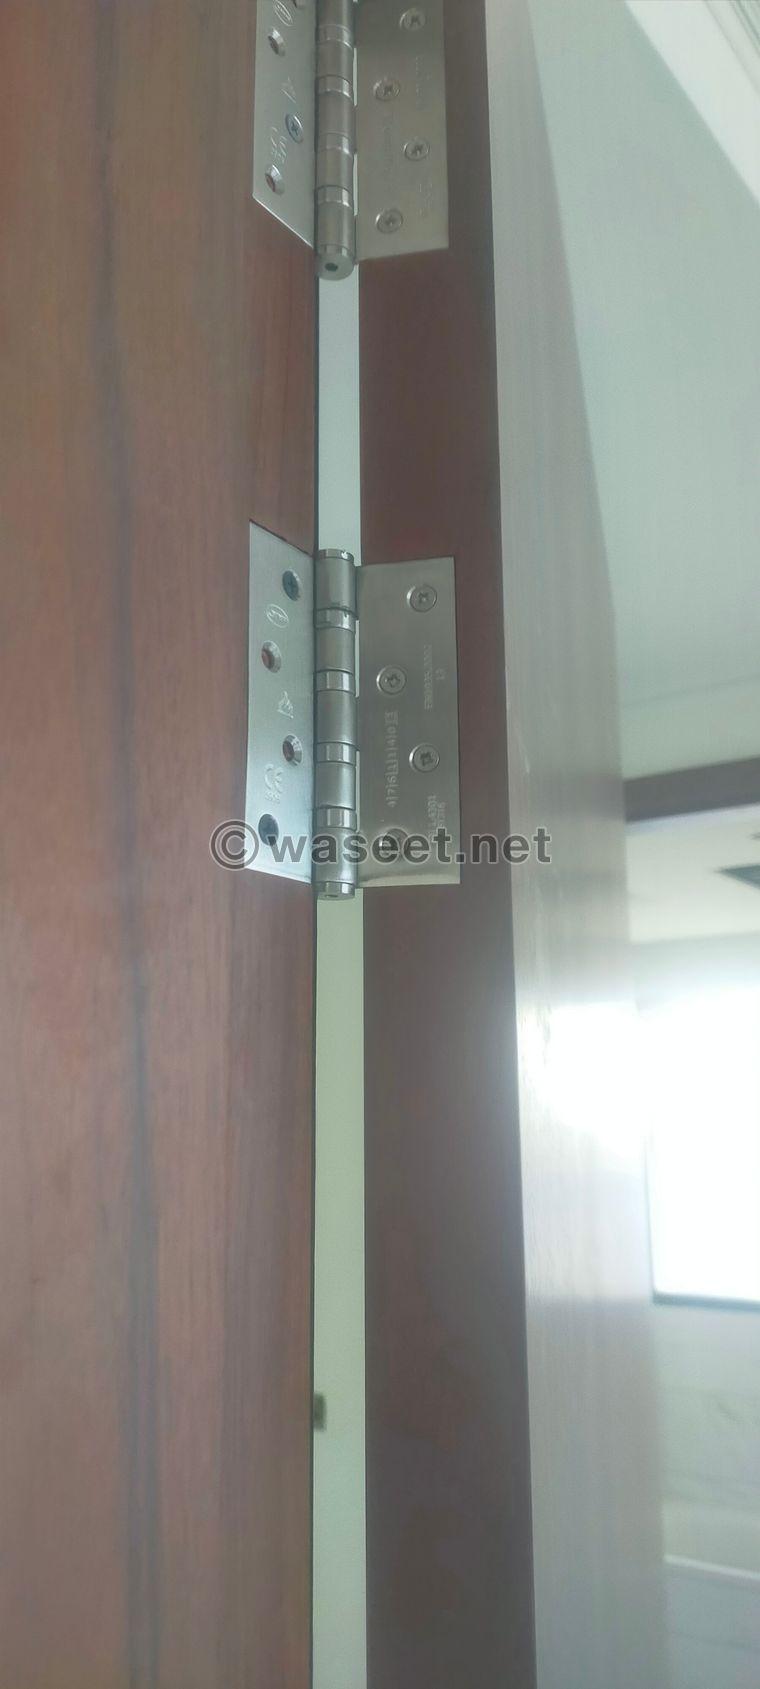 Installations and manufacturing of doors, cabinets, bedrooms and kitchens 10